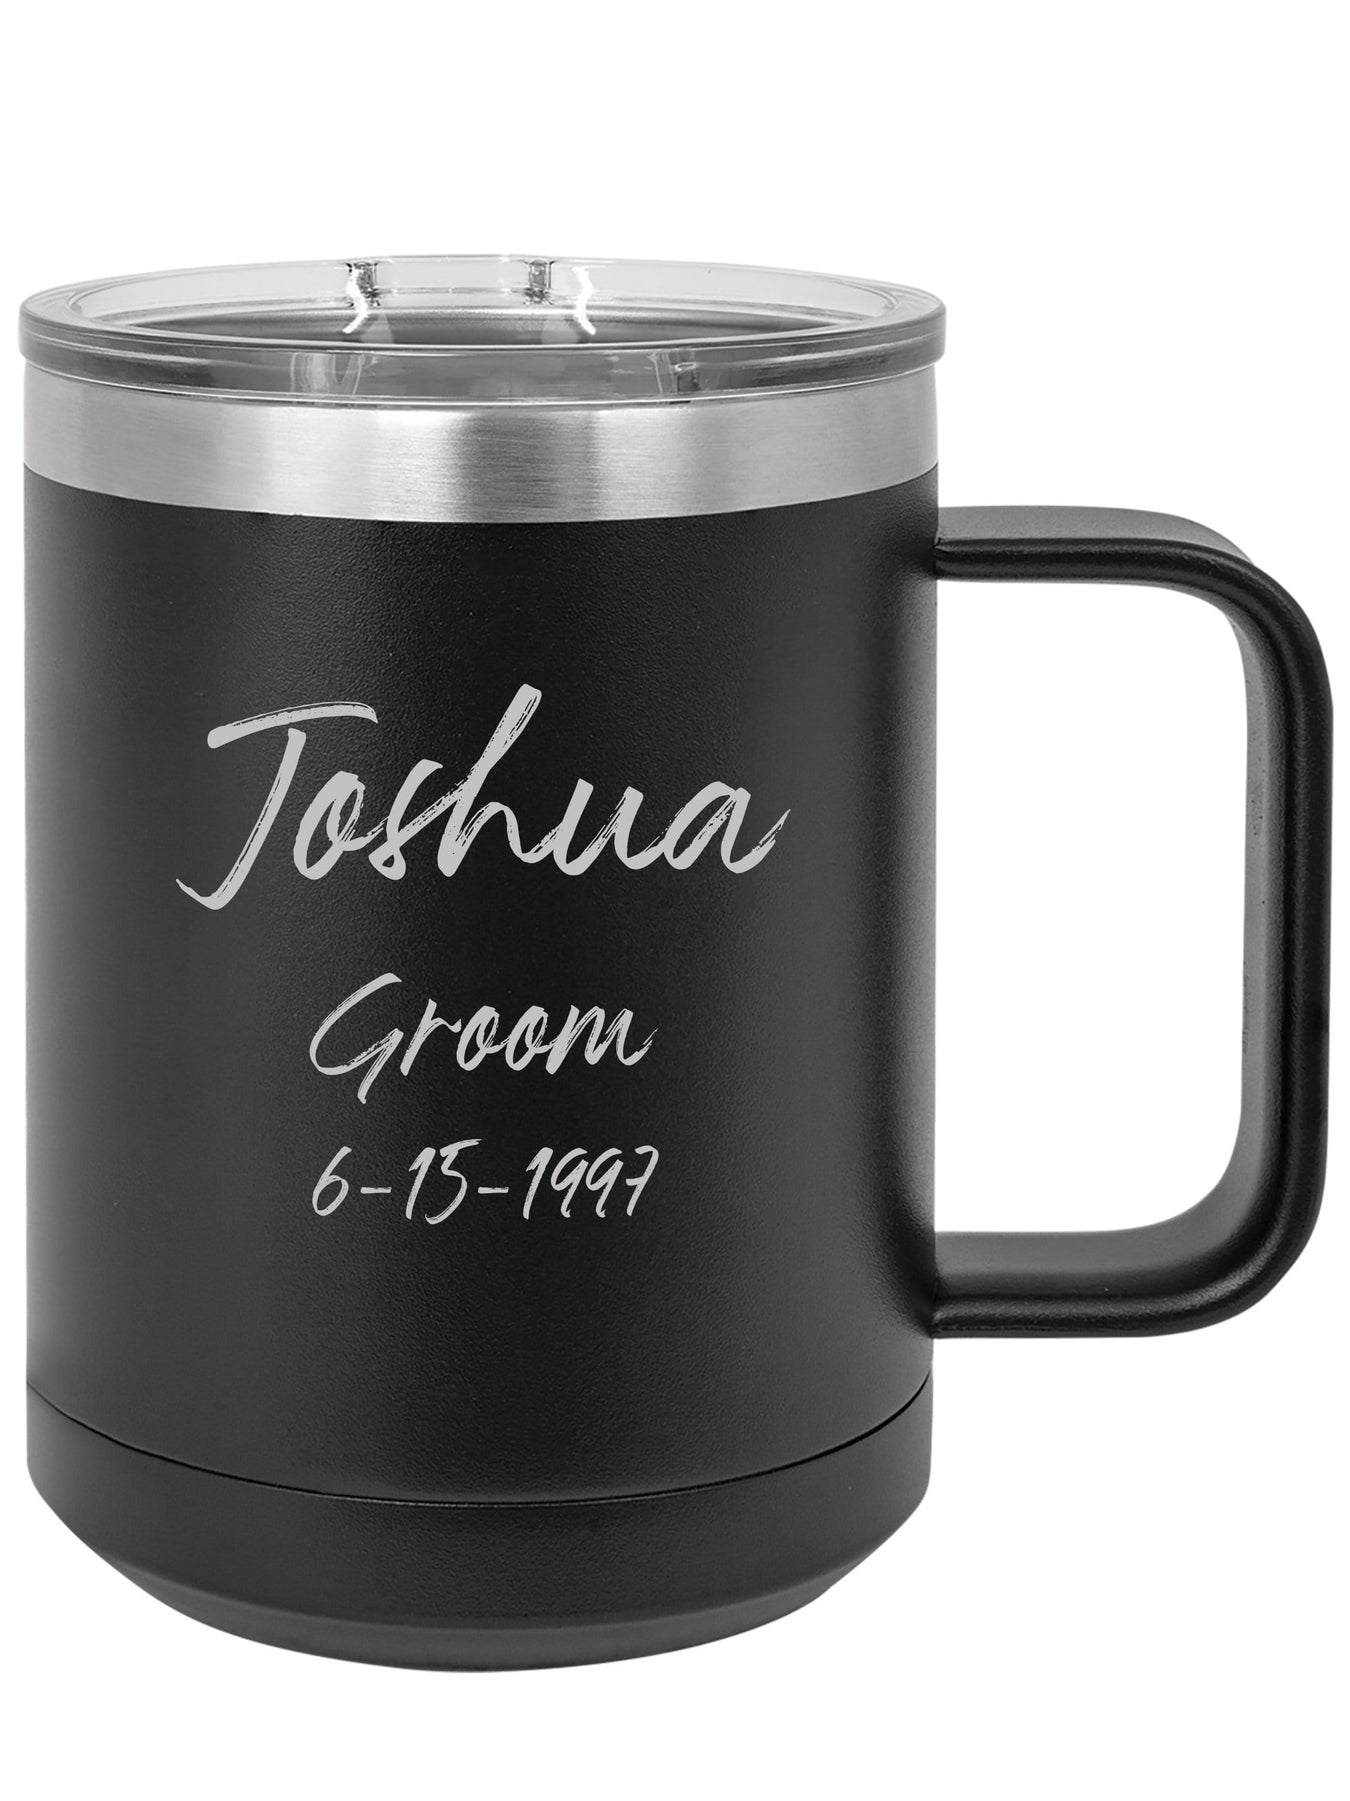 Personalized Coffee Mugs & Cups